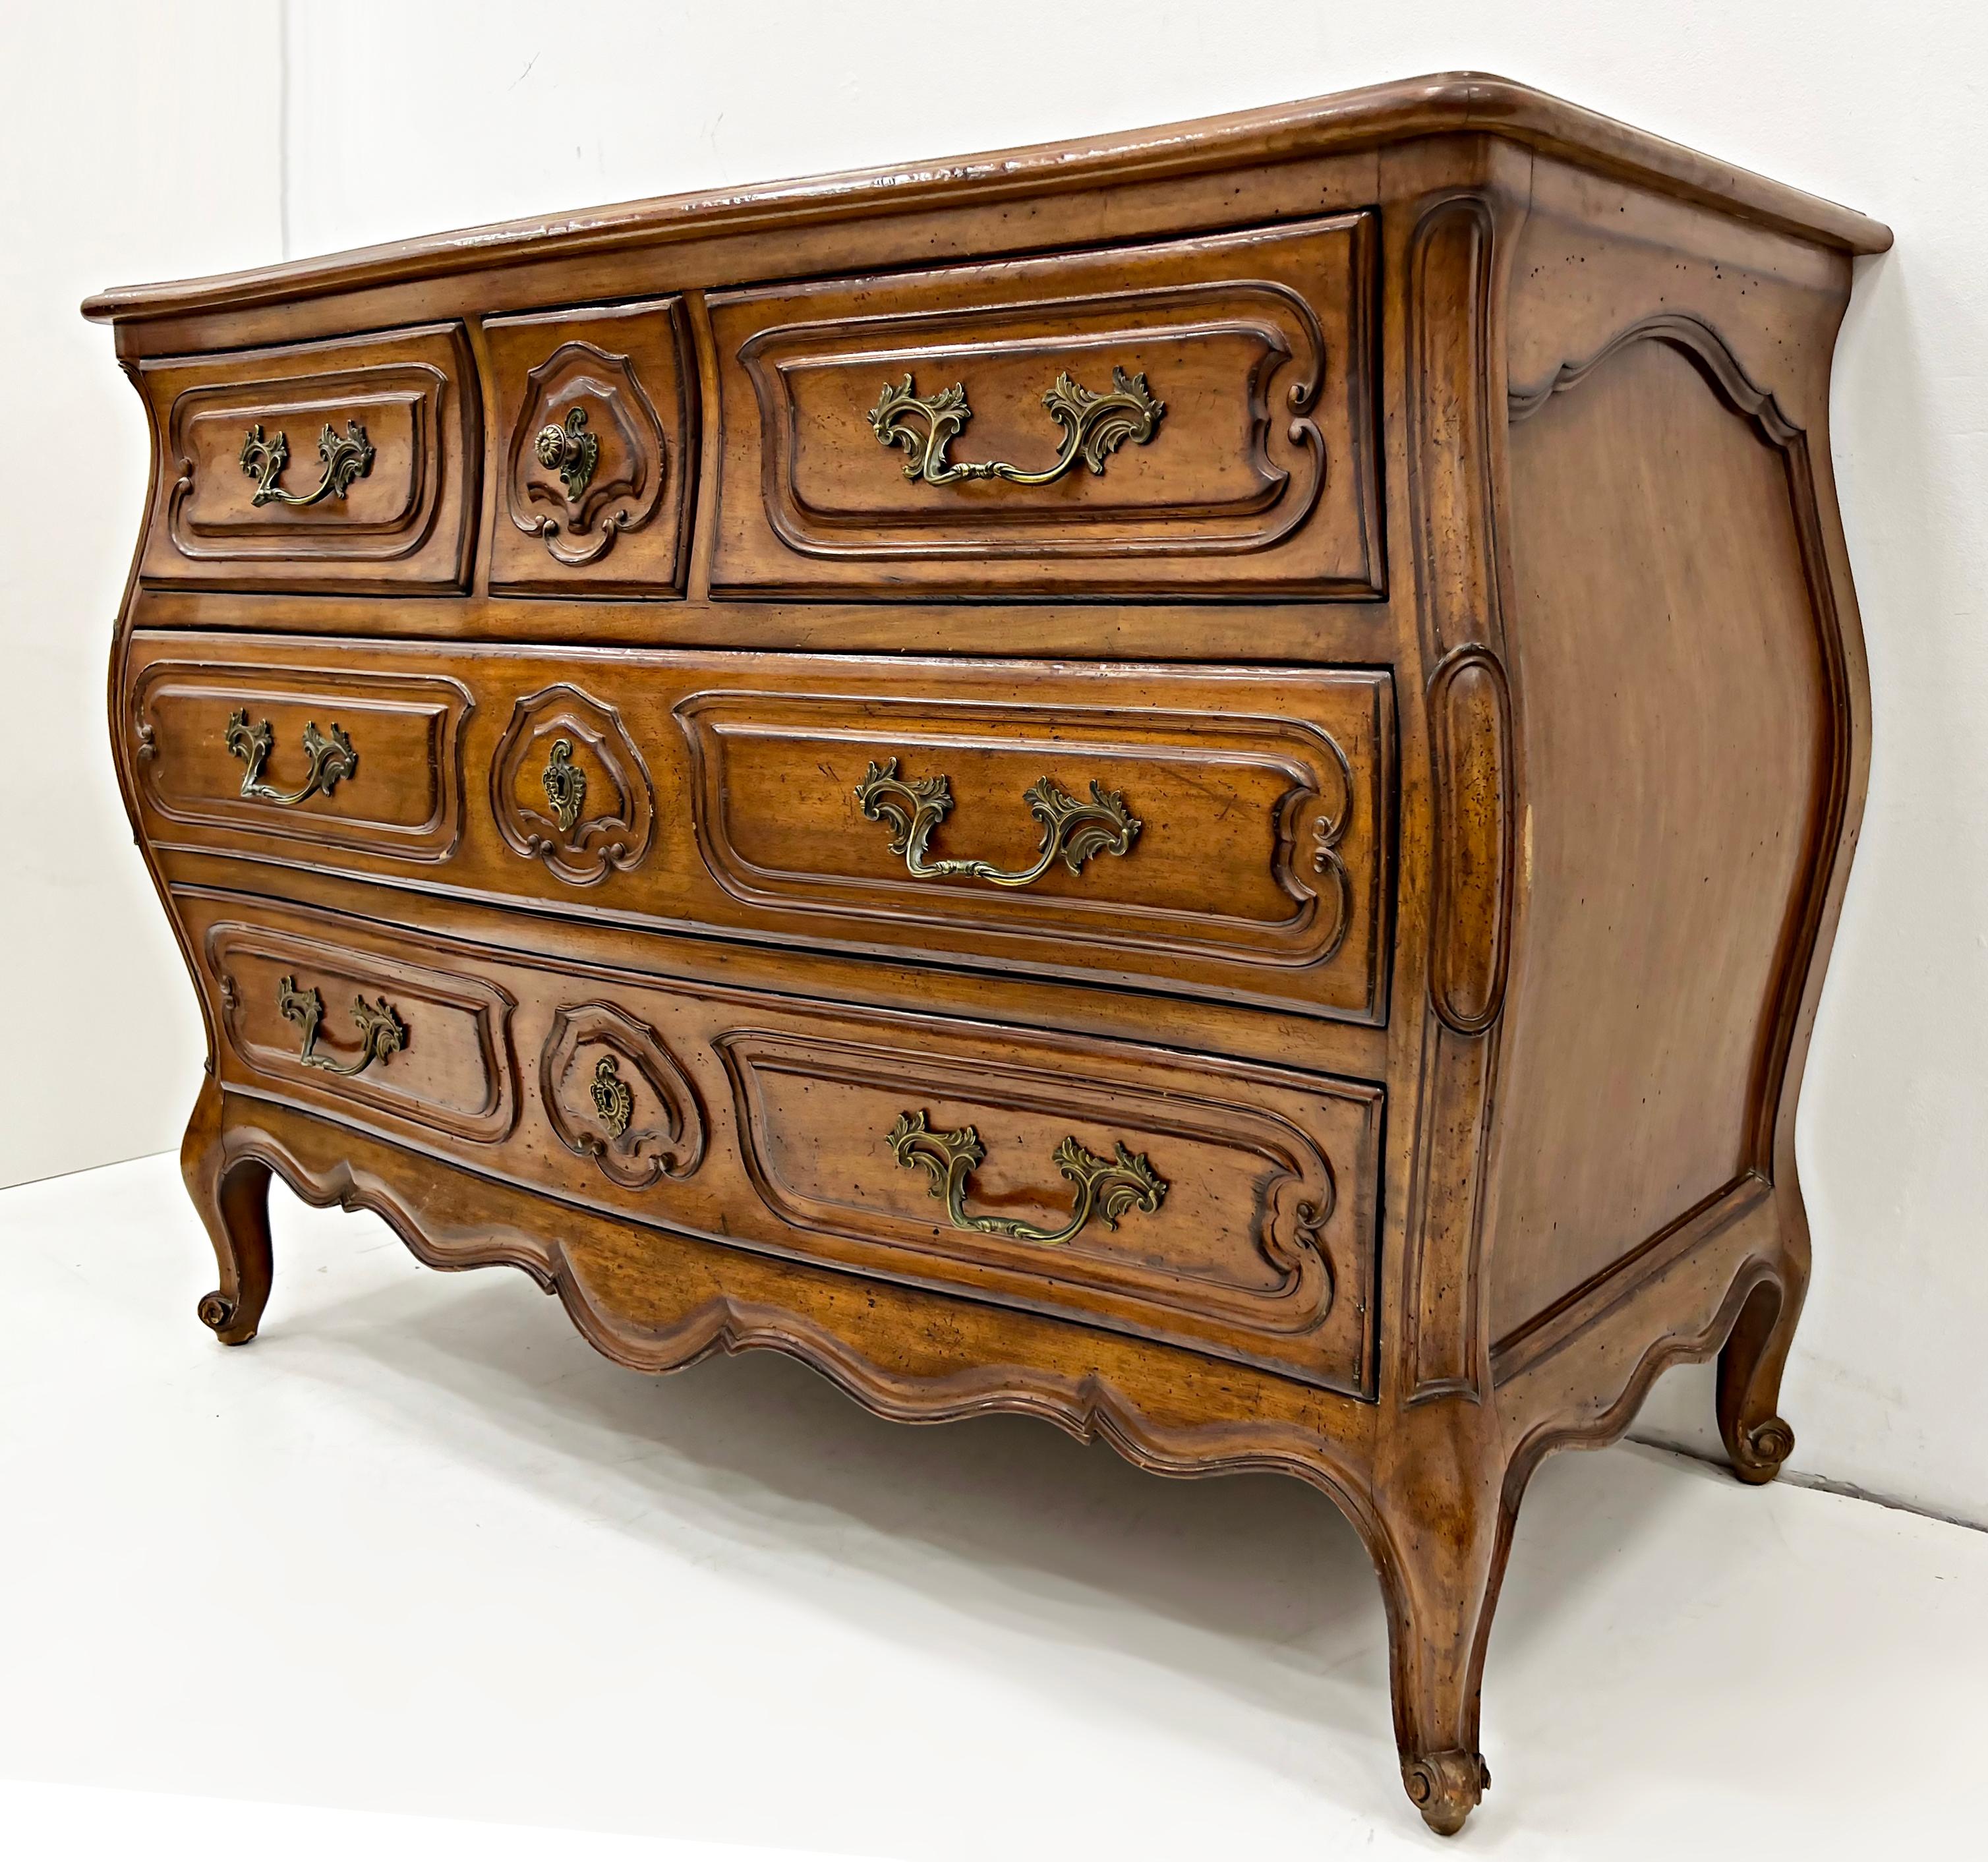 American French Provincial Style Auffray & Co. Bombay Chest of Drawers